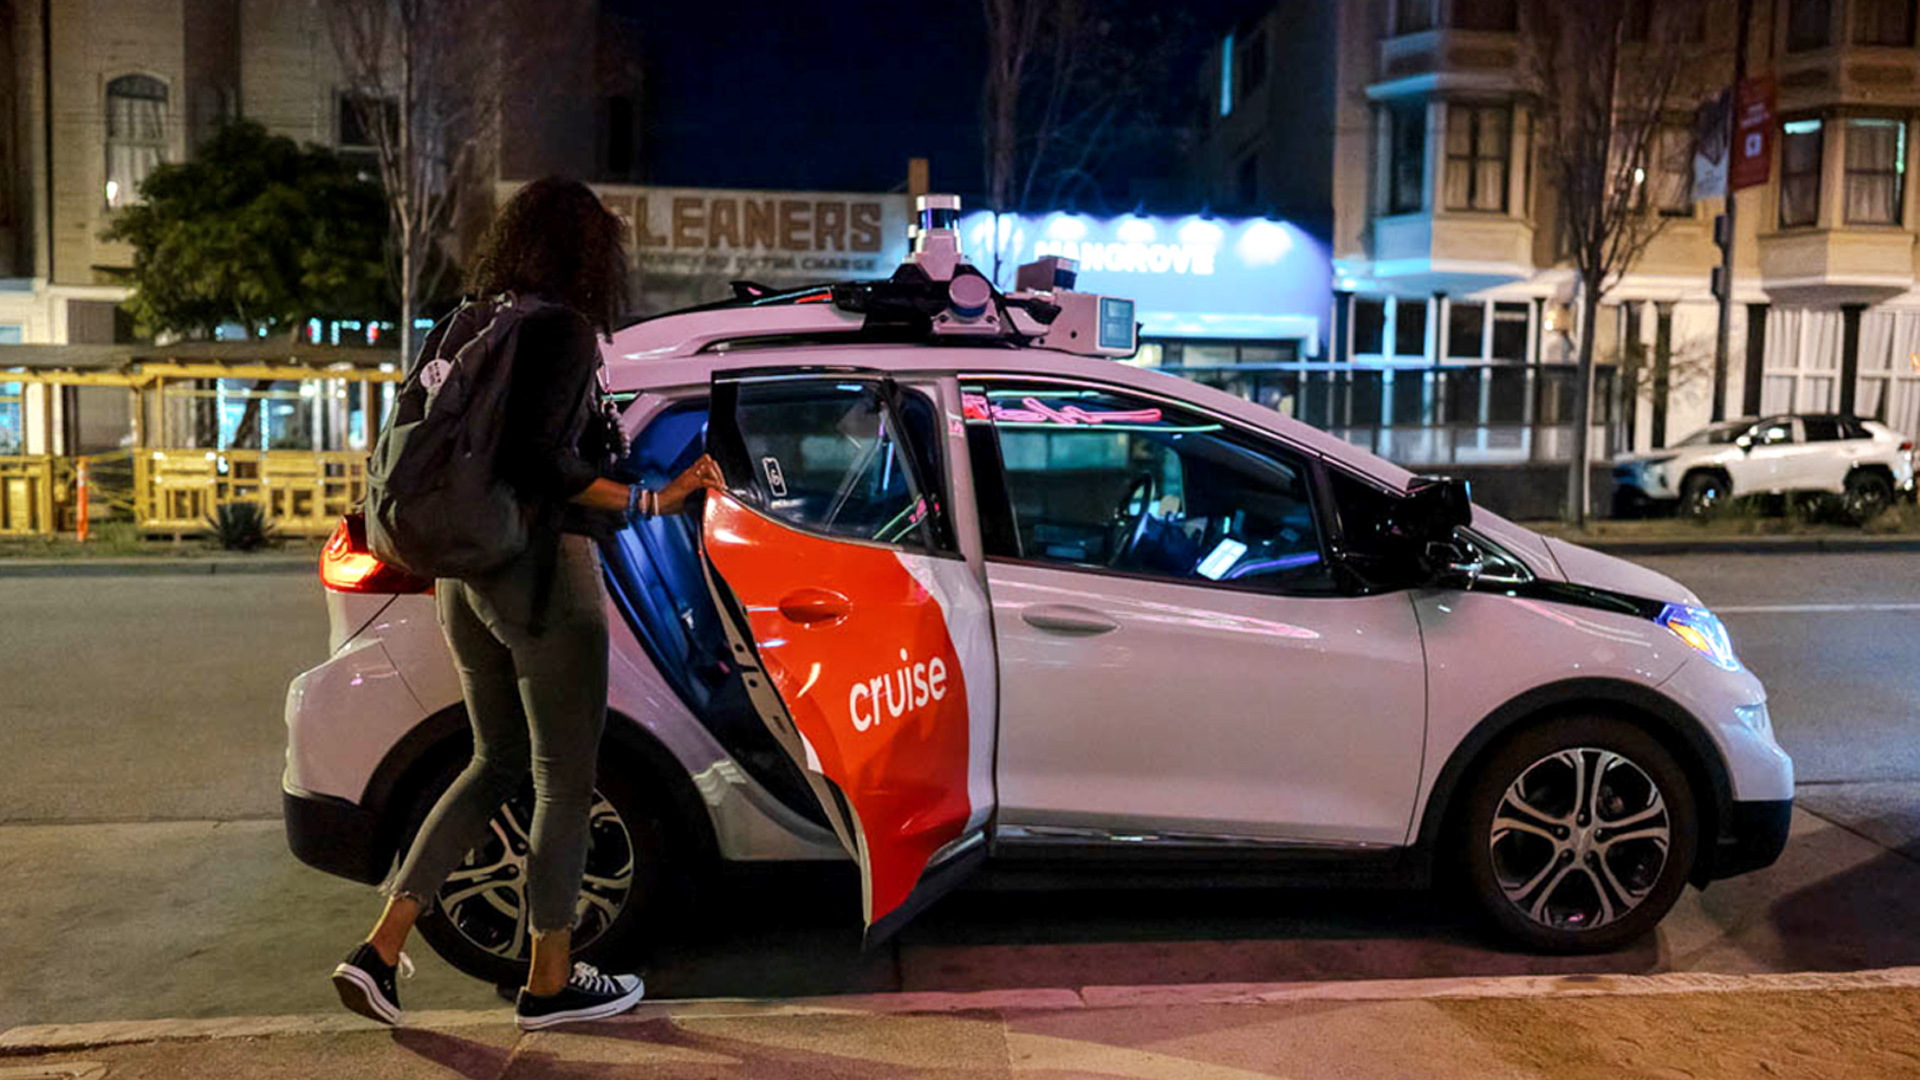 Cruise self-driving taxi in San Francisco